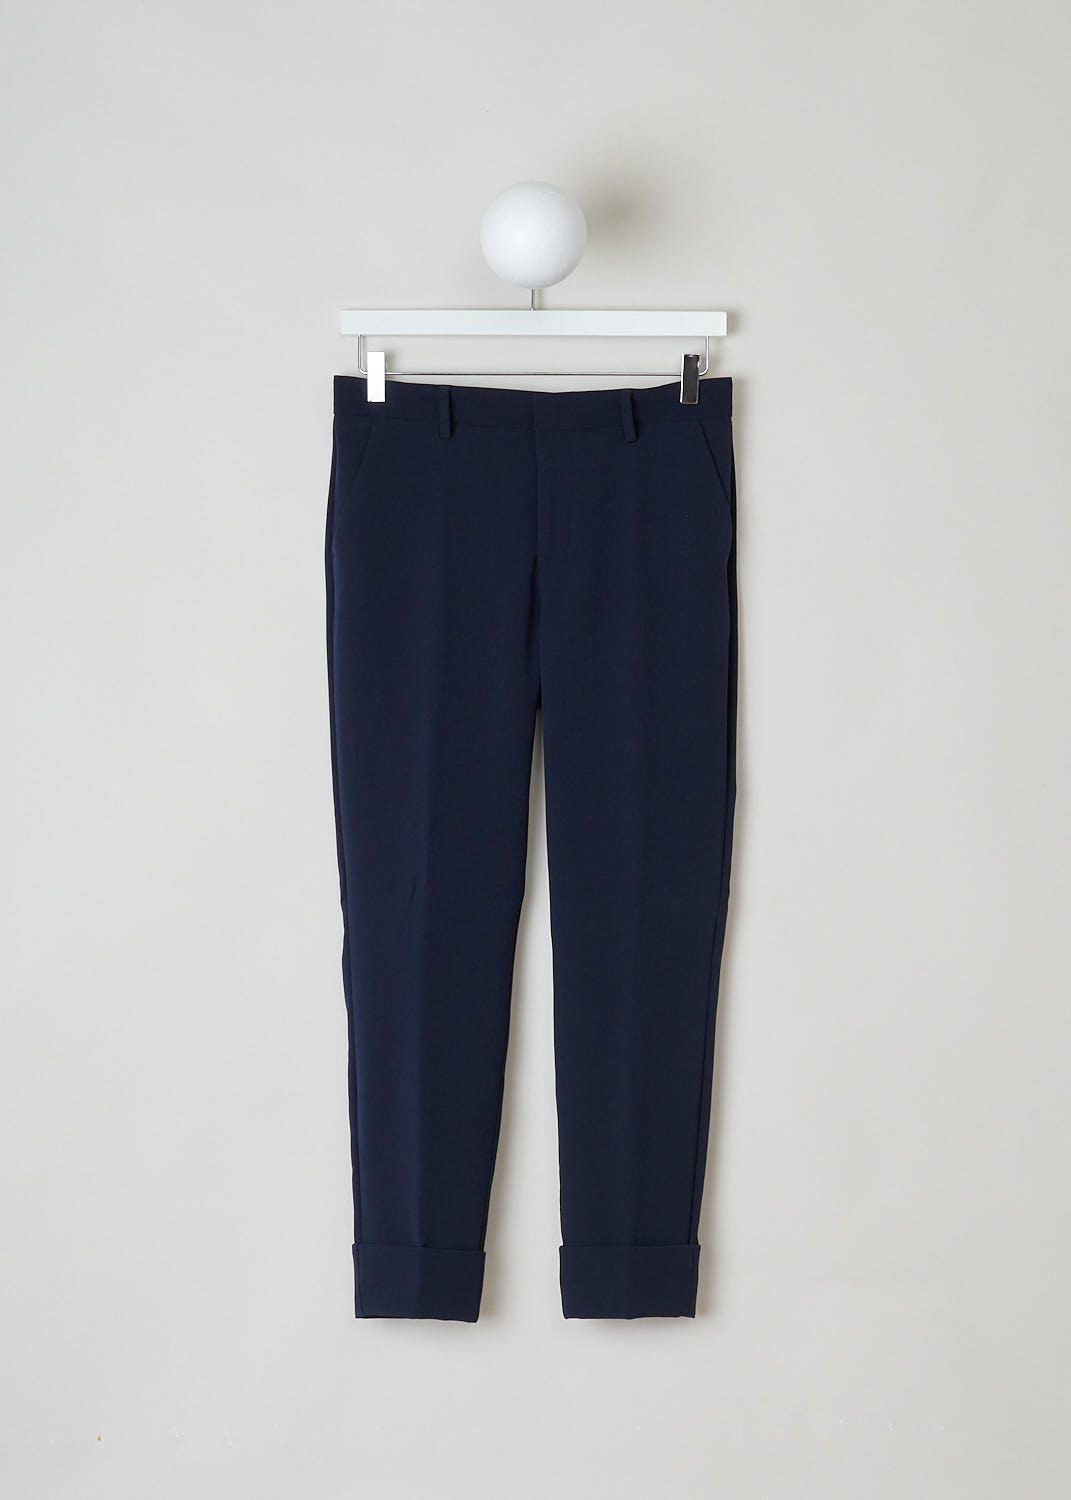 CLOSED, CLASSIC NAVY TROUSERS, Stewart_C91796_37G_22_568, Blue, Front, Made in the classic trouser model, featuring forward slanted pockets on the front and two buttoned welt pockets on the back. What makes this model stand out above the rest is the broad fold-over hem.